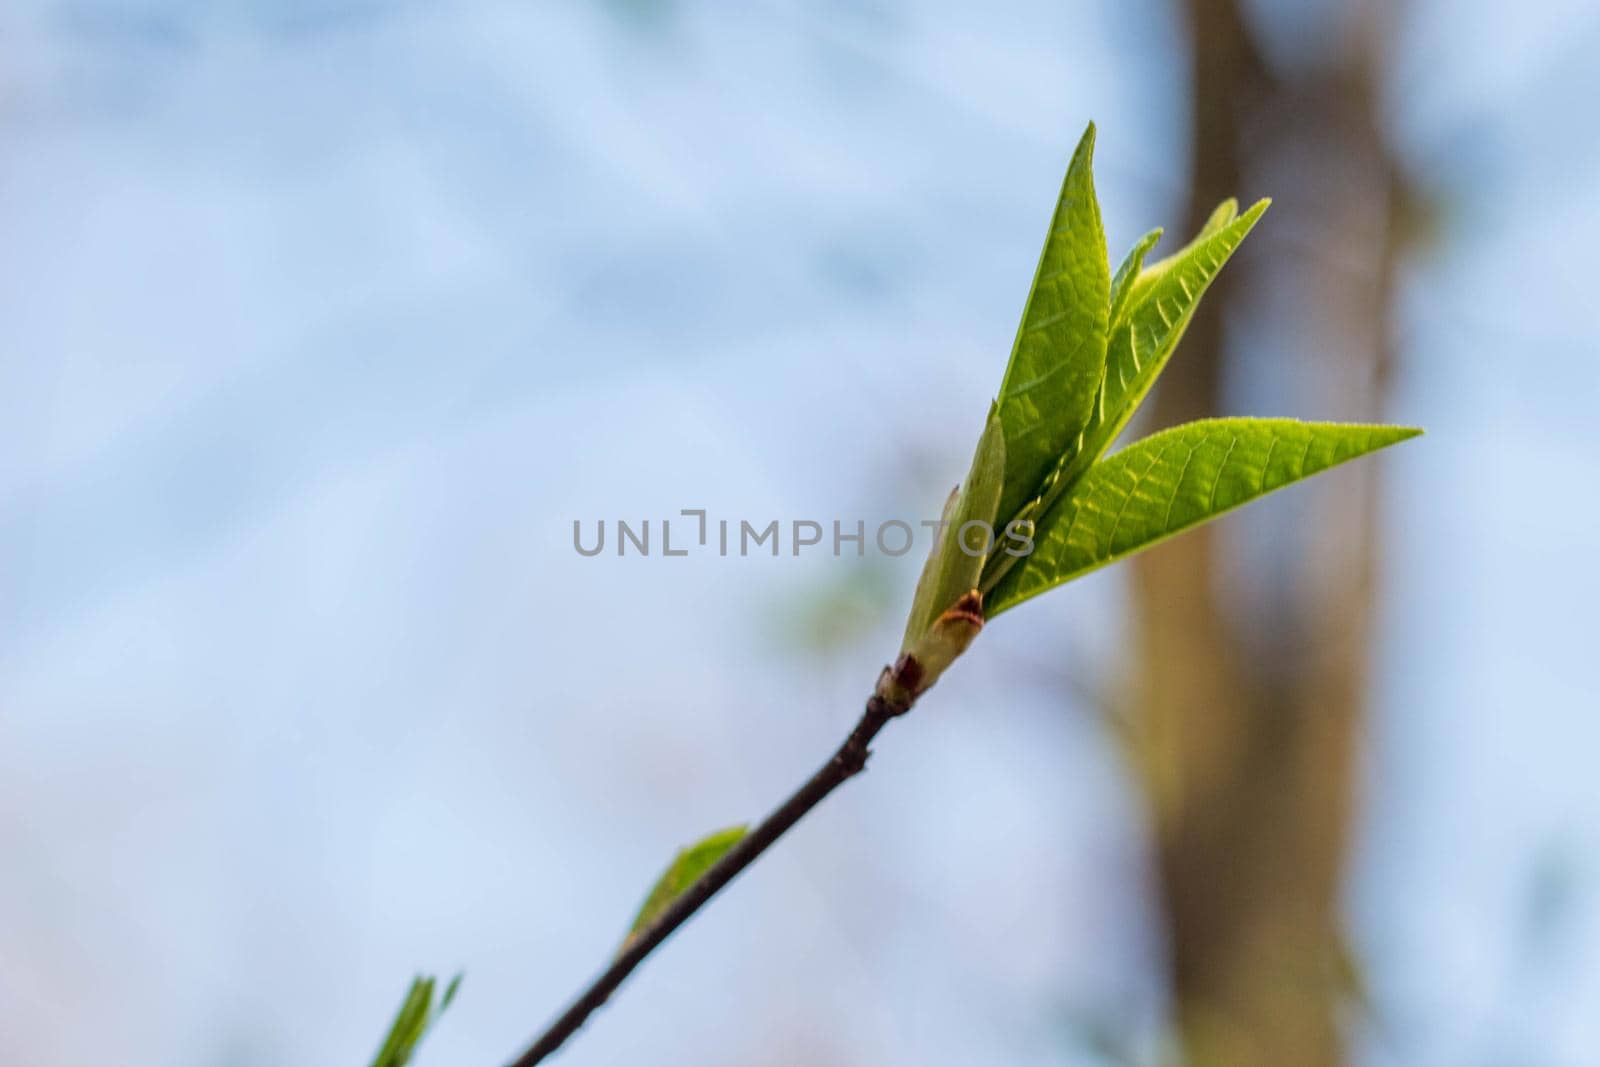 The first spring gentle leaves, buds and branches macro blurred background by galinasharapova